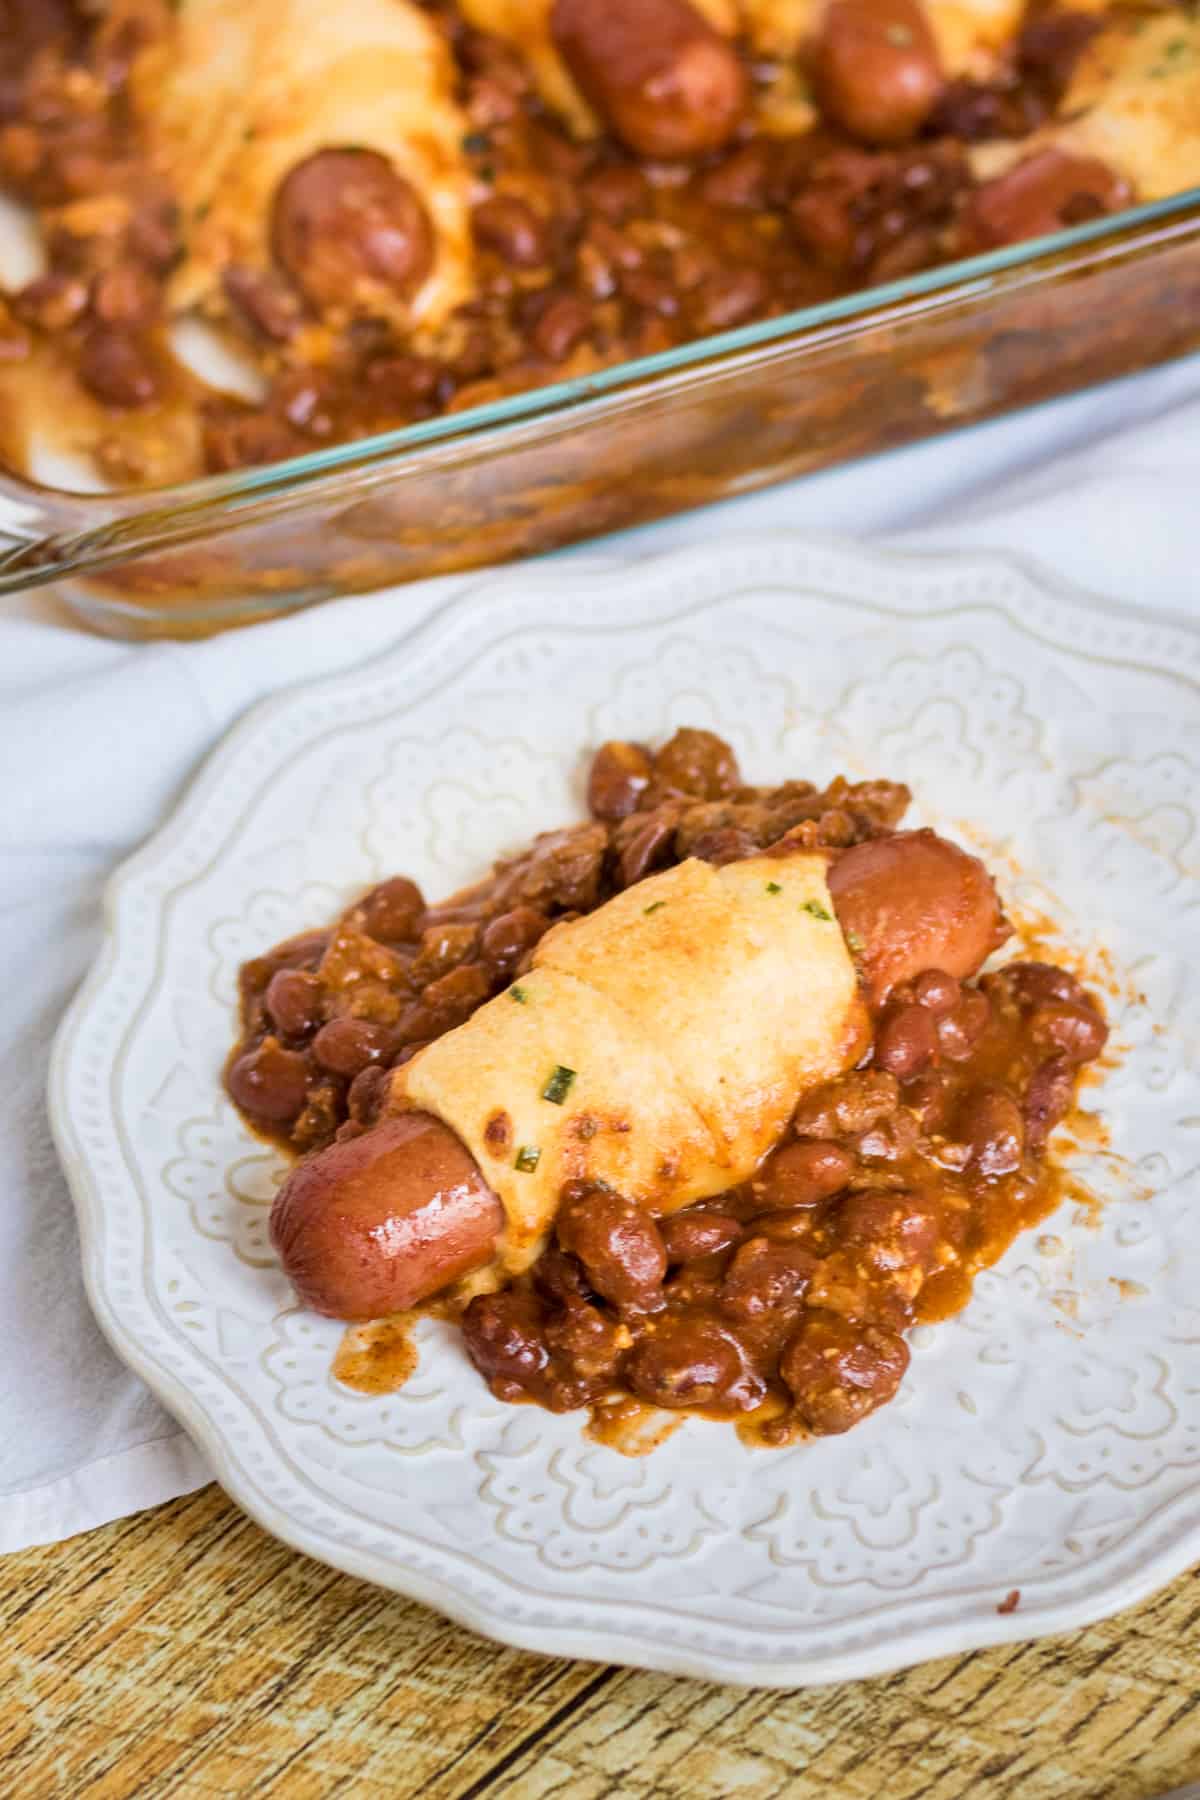 one chili cheese crescent hot dog on plate with casserole in background